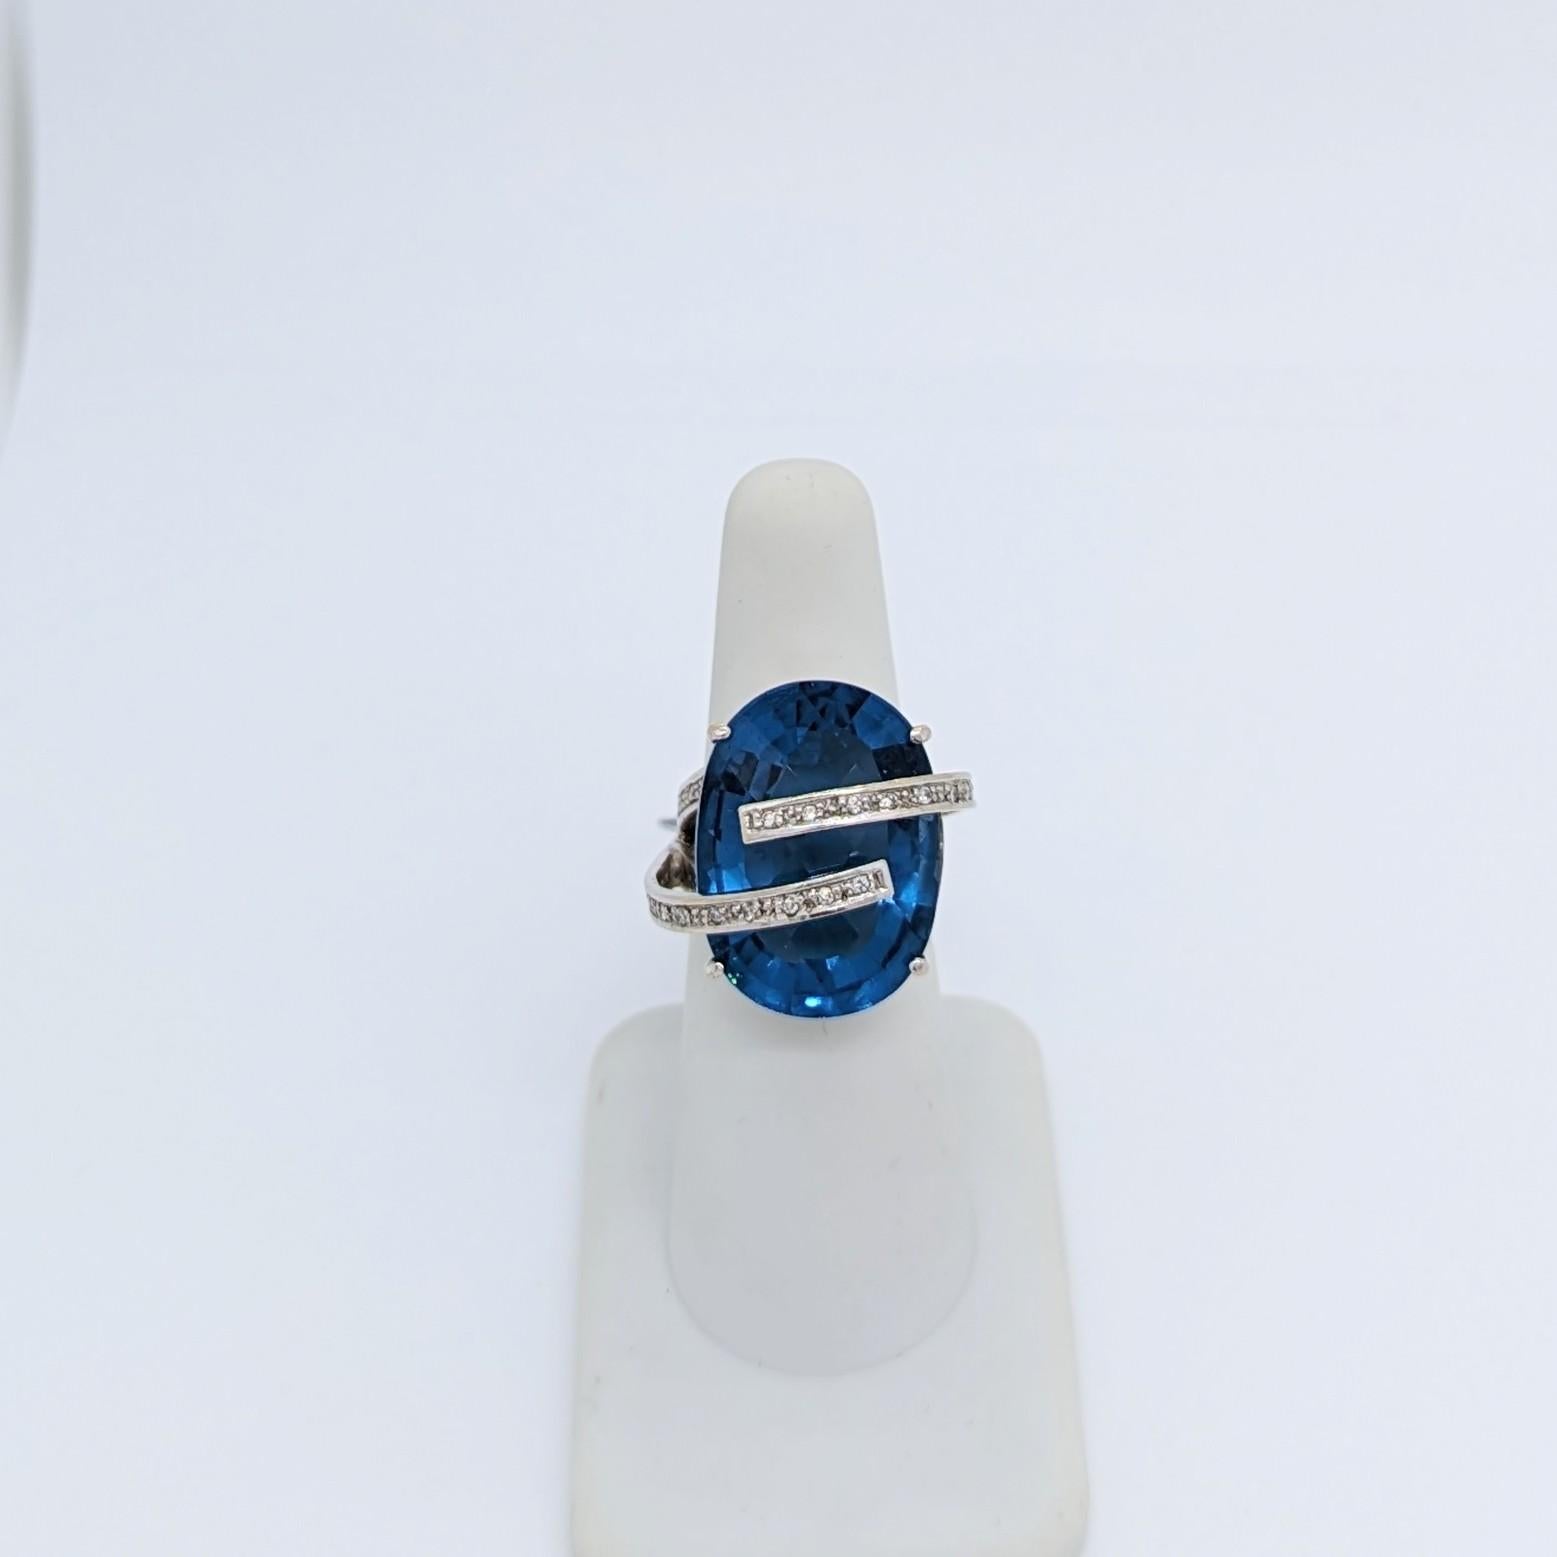 Blue Semi Precious Oval and White Diamond Cocktail Ring in 14K White Gold